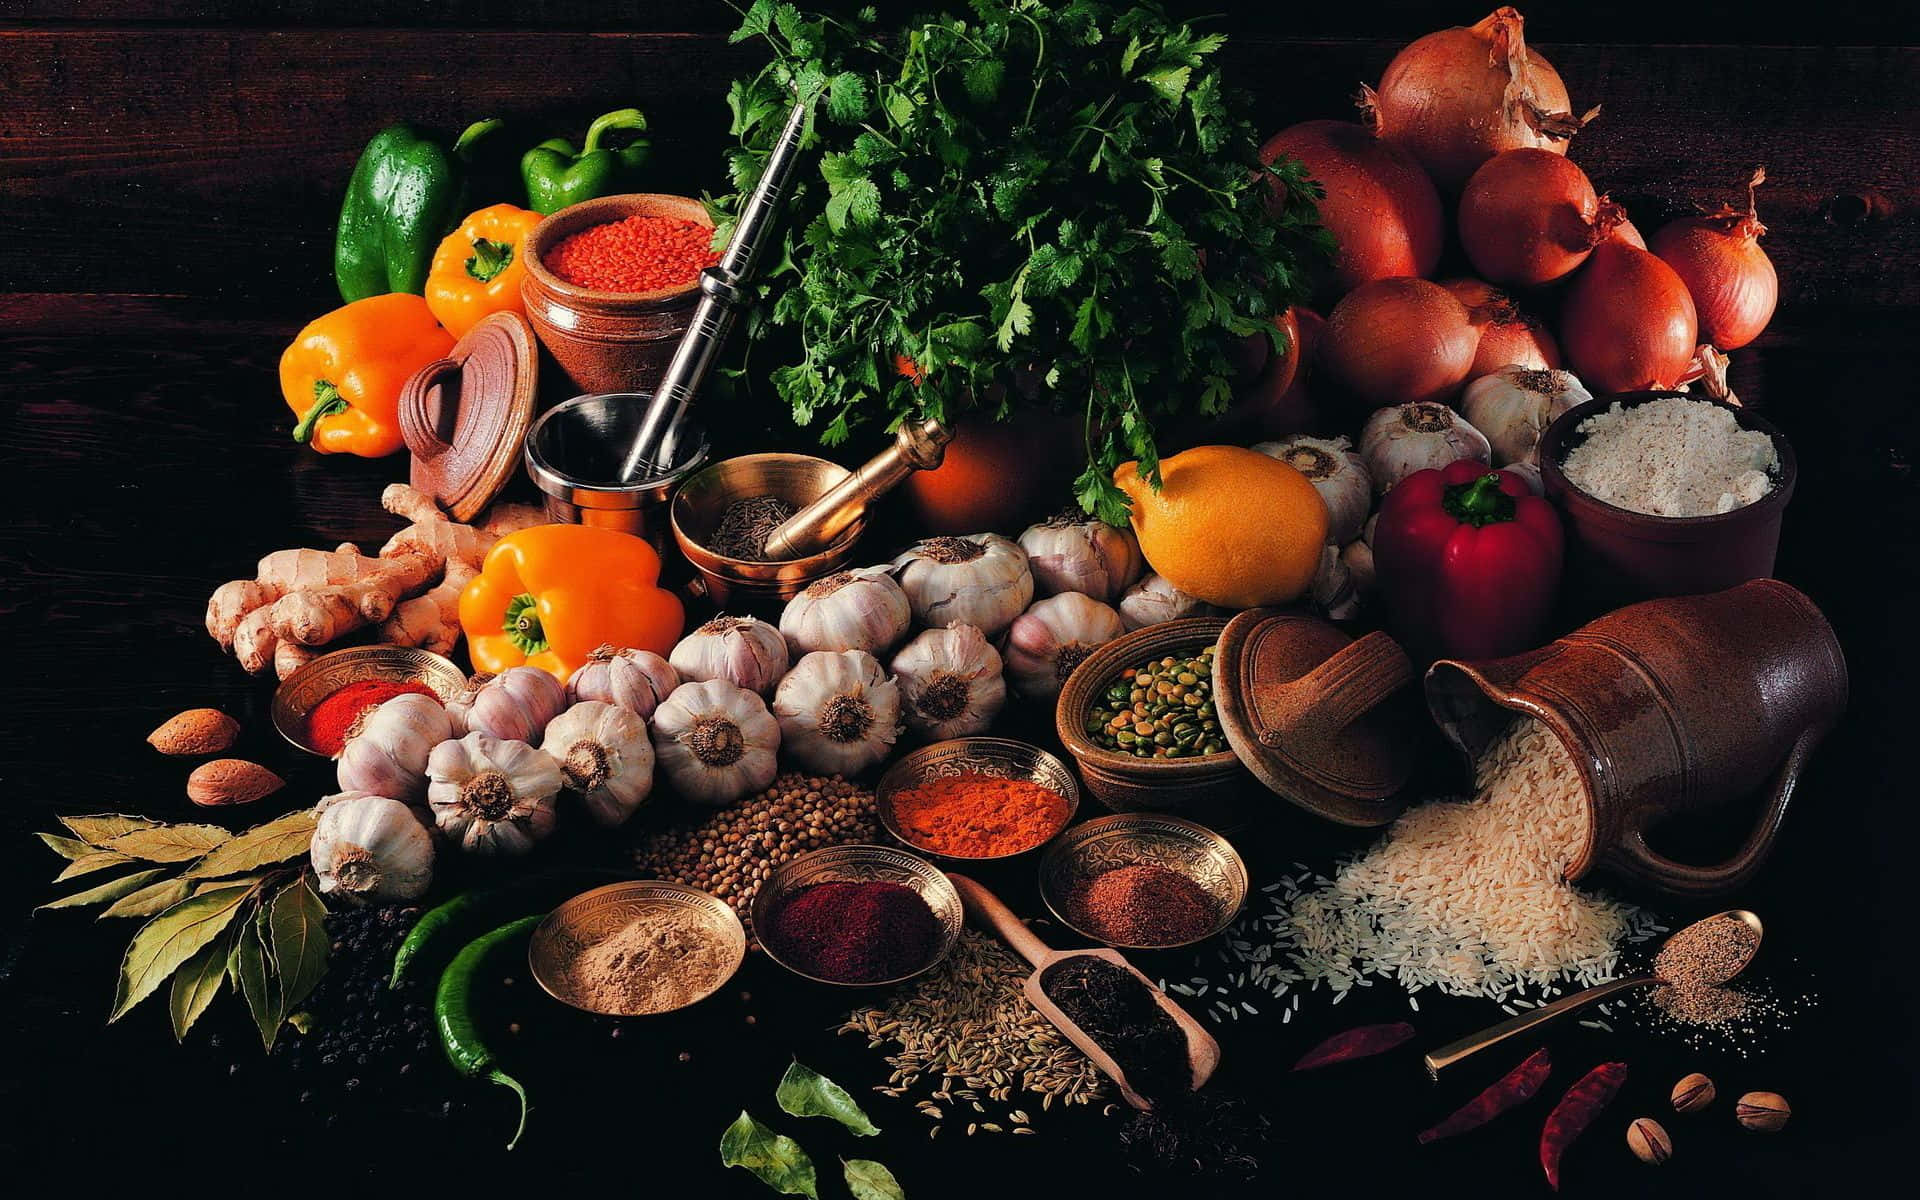 A Variety Of Spices And Vegetables Are Arranged On A Table